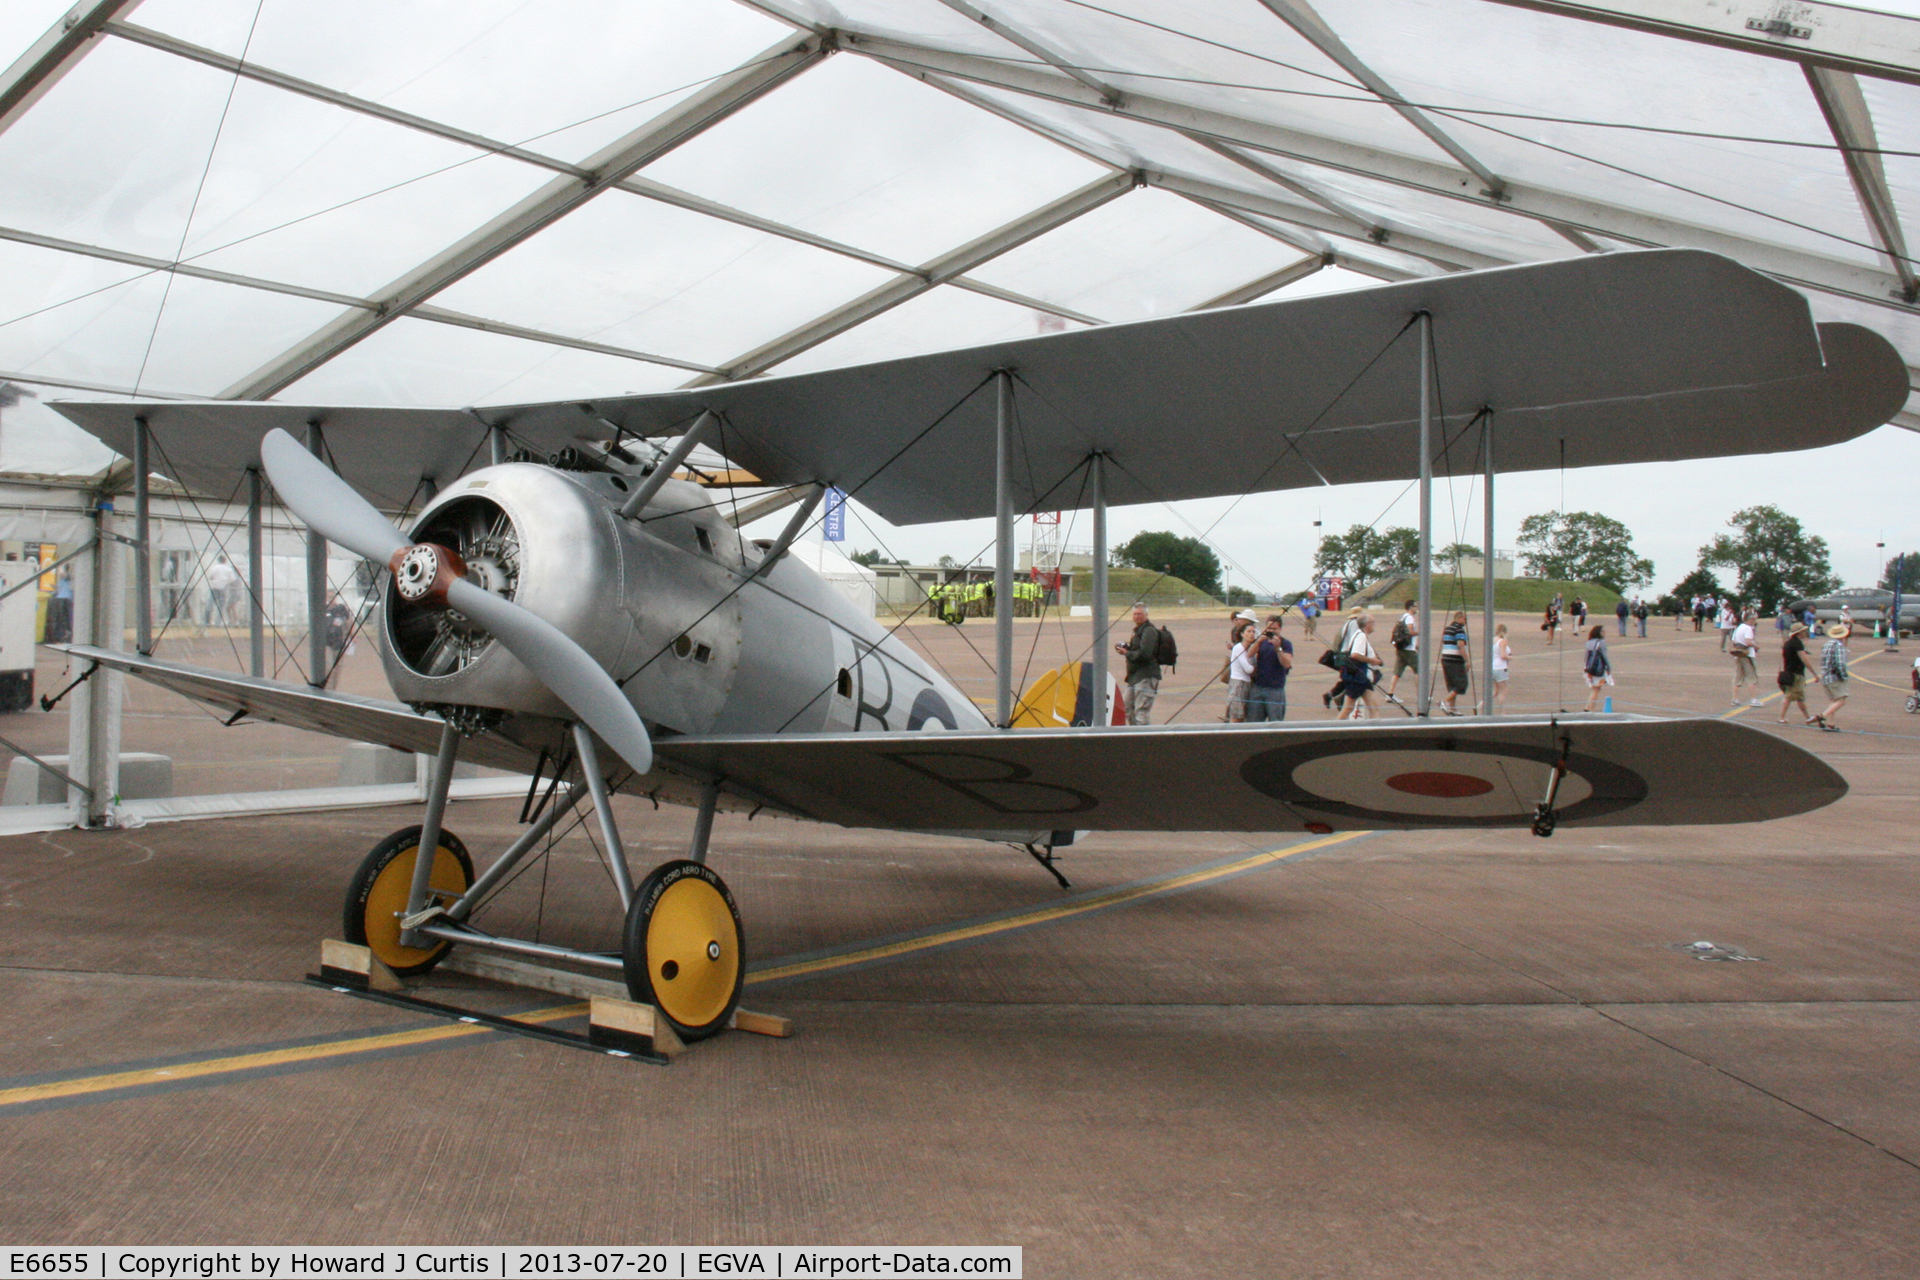 E6655, Sopwith Snipe 7F.1 Replica C/N Not found E6655, At the Royal International Air Tattoo 2013.